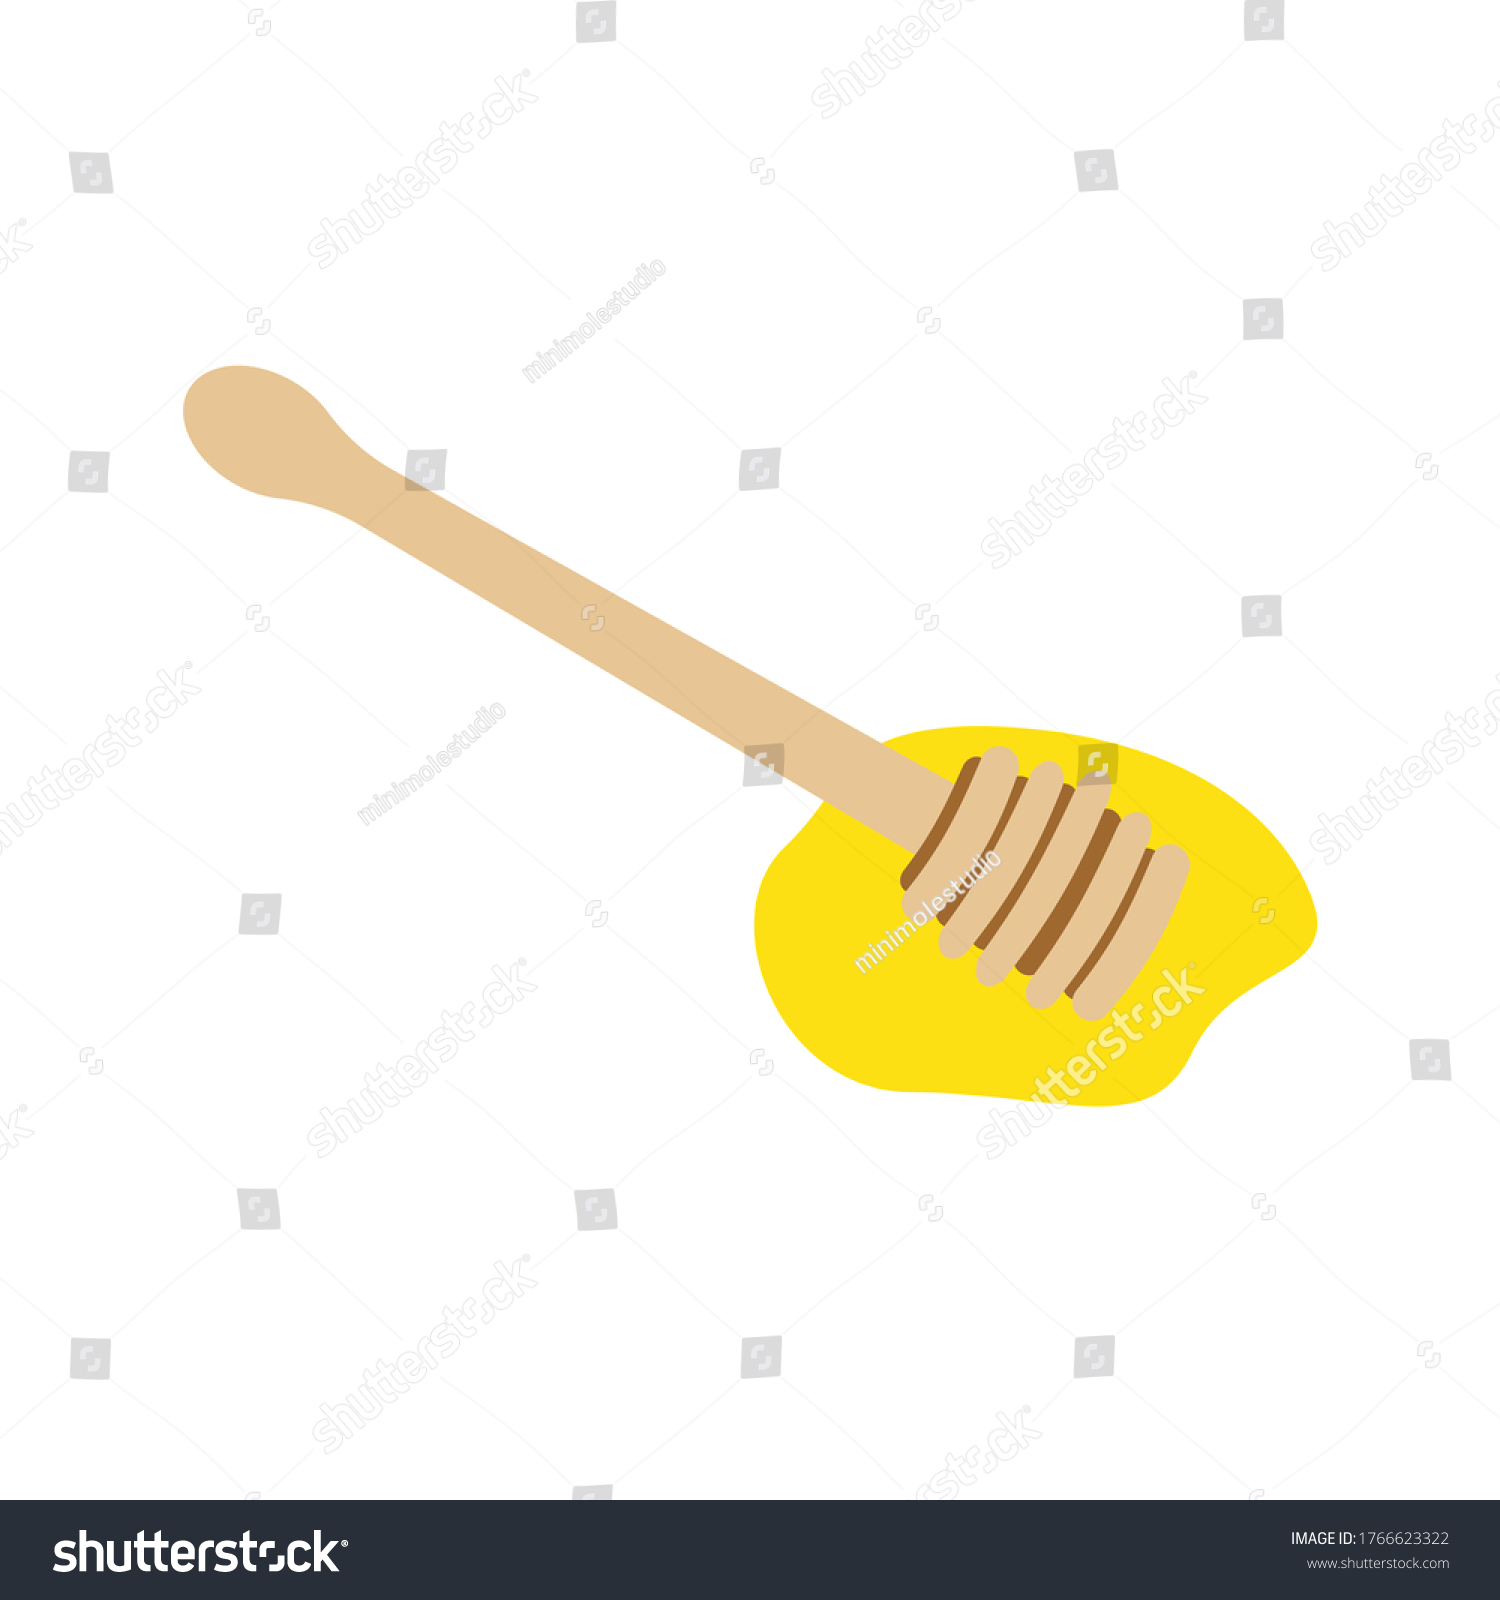 SVG of Vector illustration of a honey dipper spoon. Flat style. svg